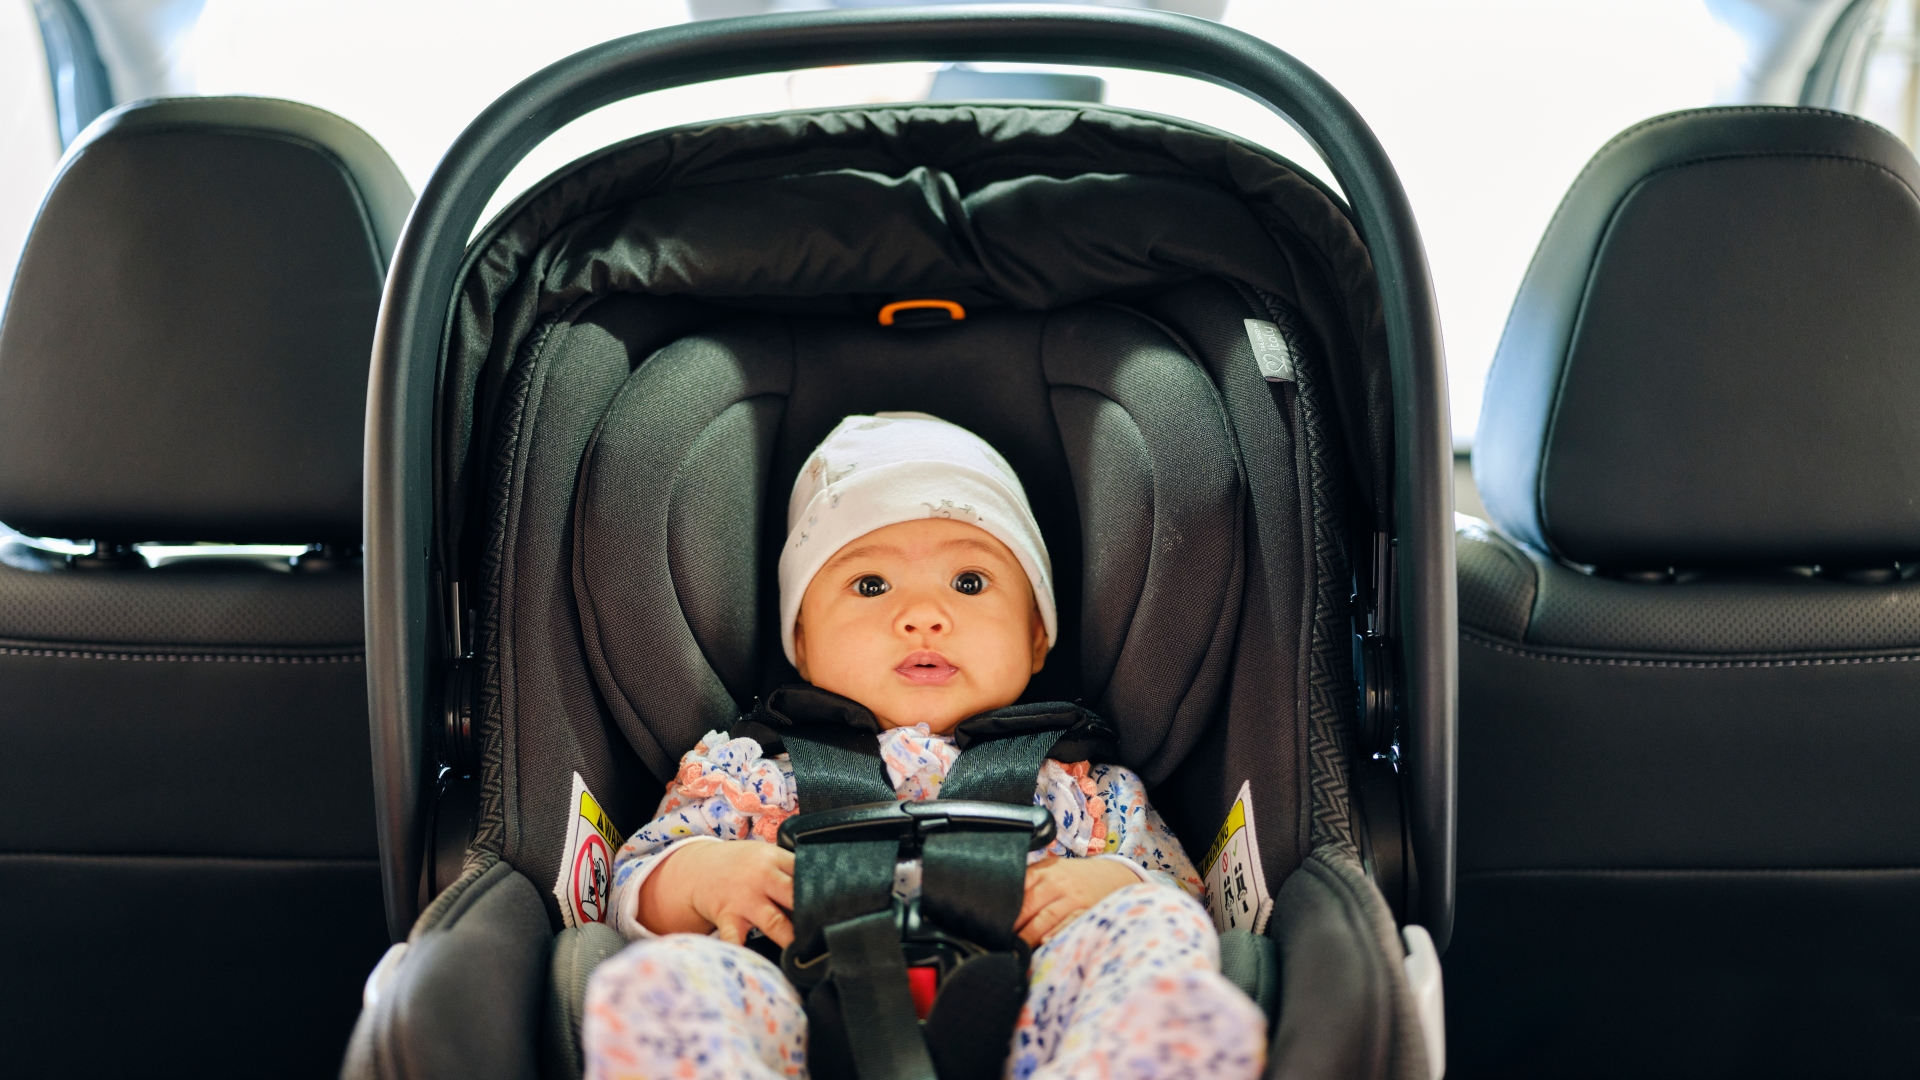 I’m a first aider and here’s a car seat trick that could save your child’s life